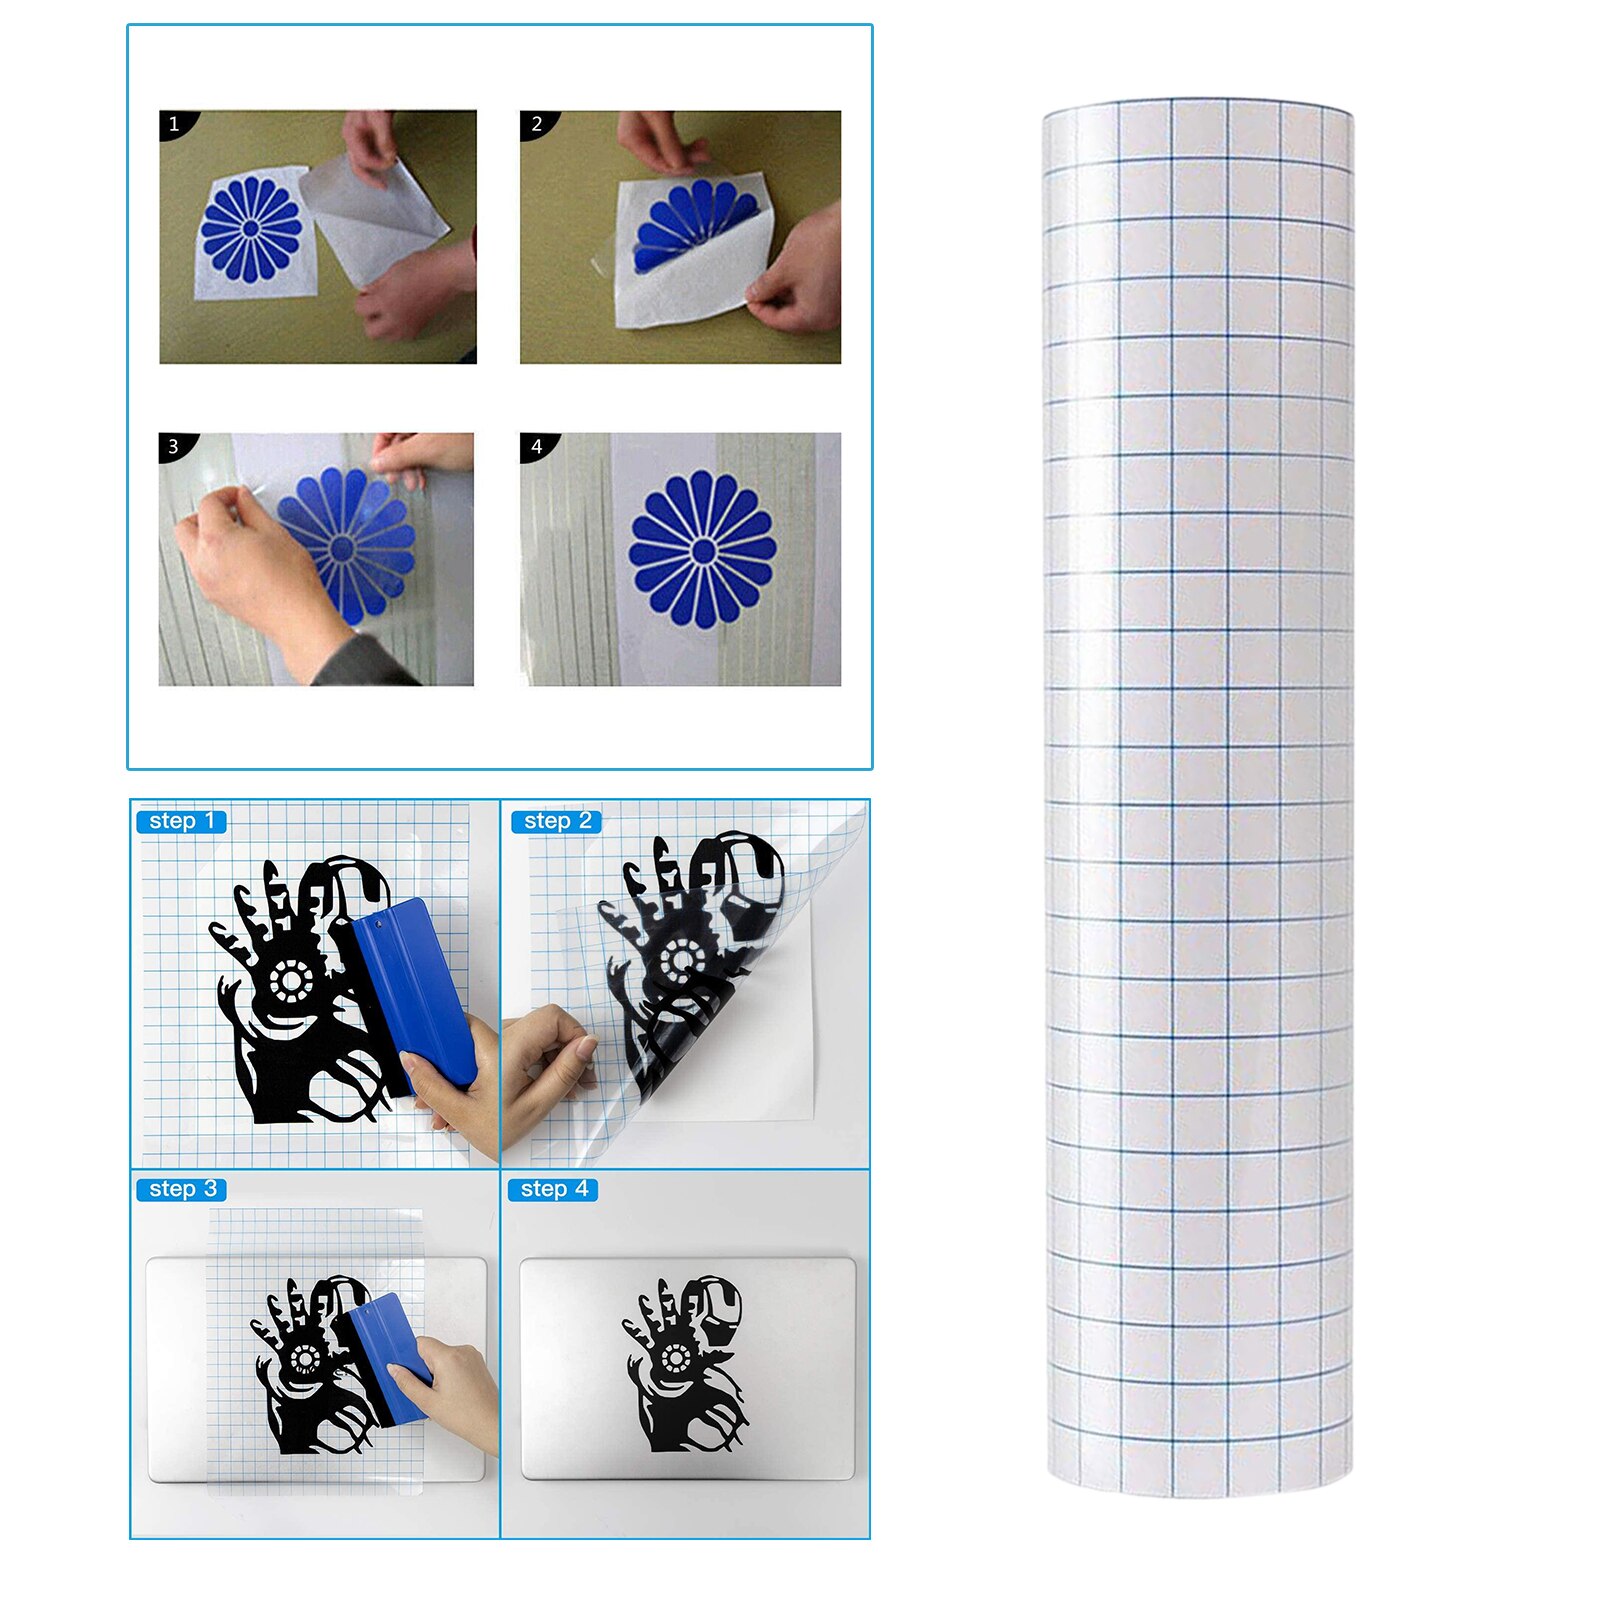 Vinyl Transfer Tape Roll (12” x 3.28 Feet) Clear Vinyl Transfer Paper for Silhouette Cameo Crafts w/ Blue Alignment Grid